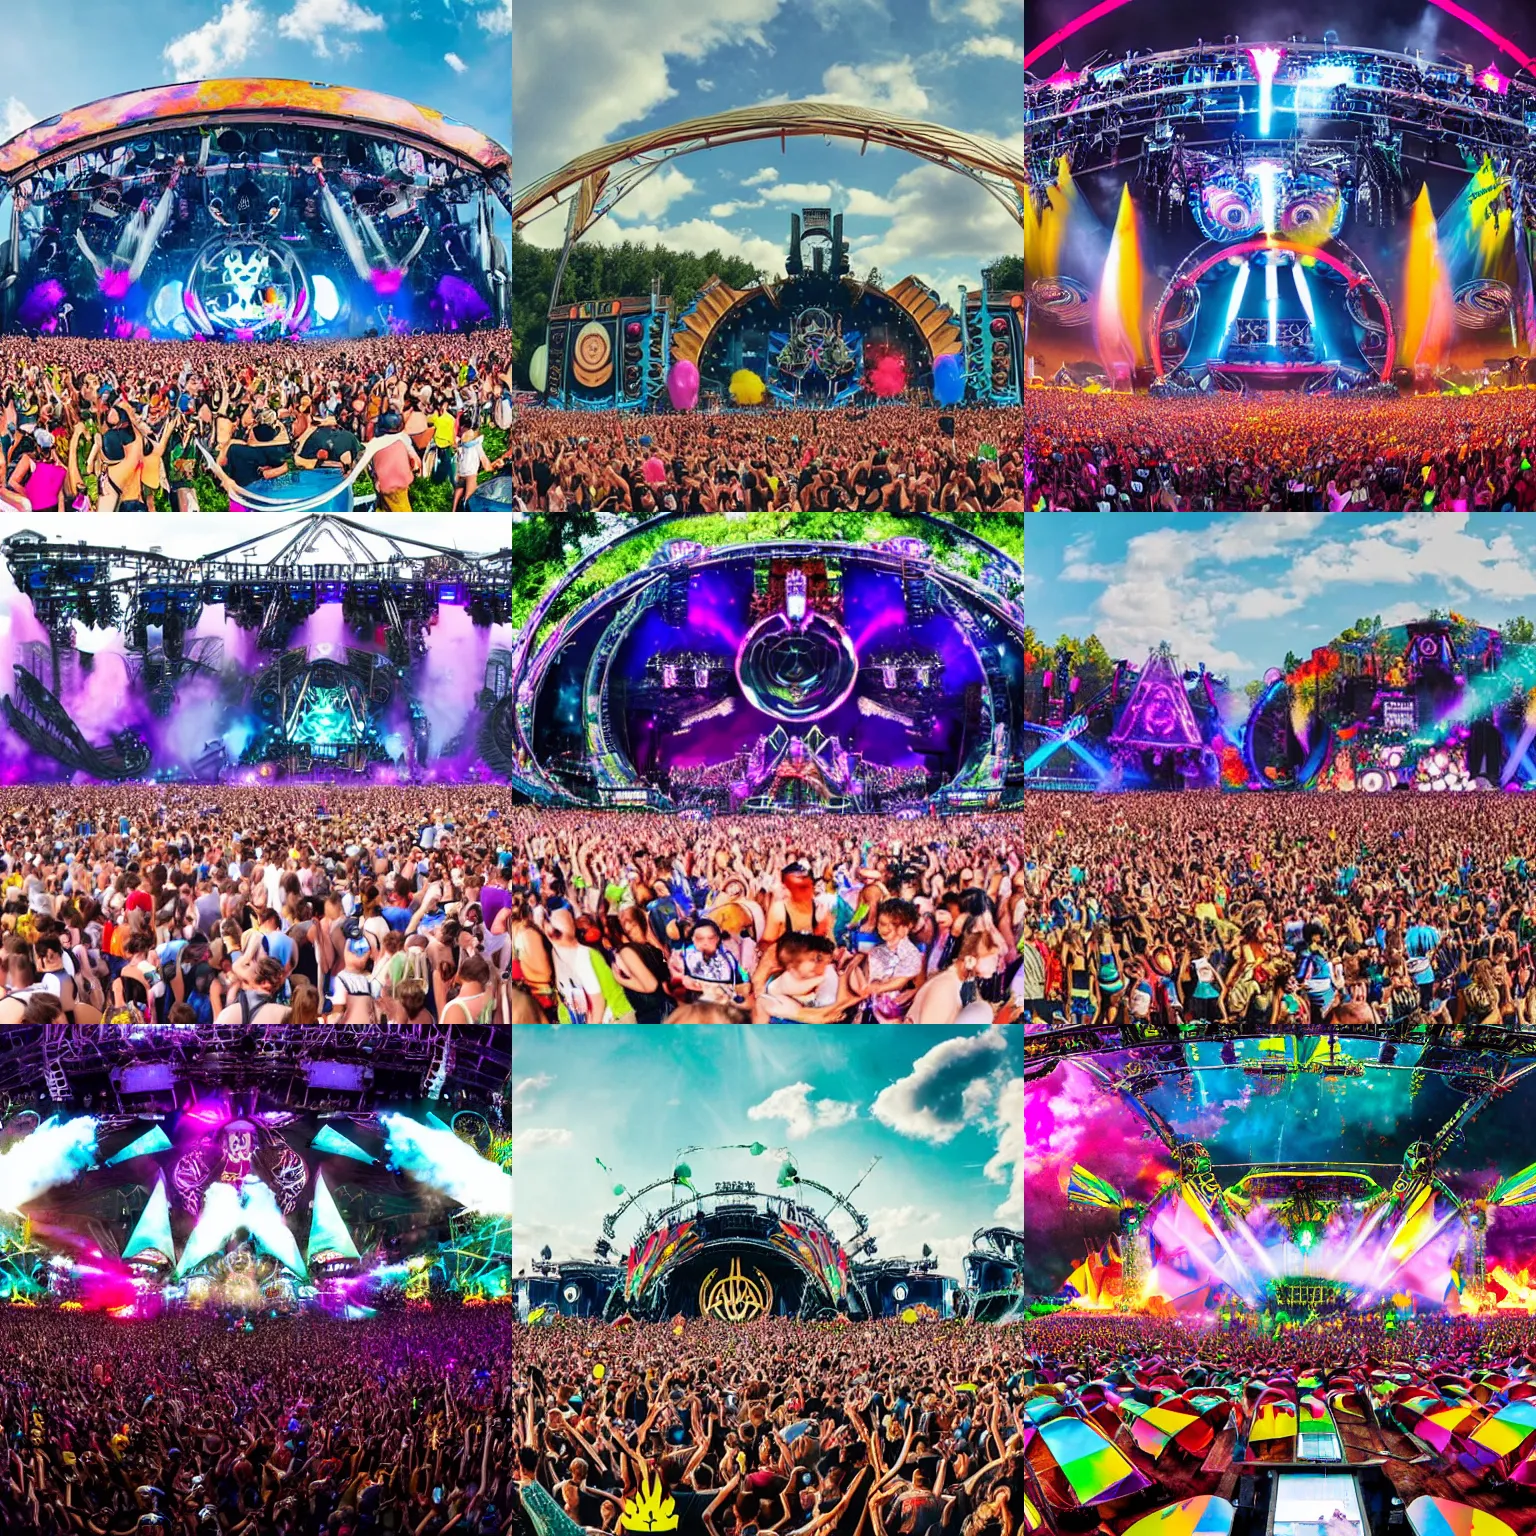 Prompt: The 2030 main stage of the tomorrowland festival